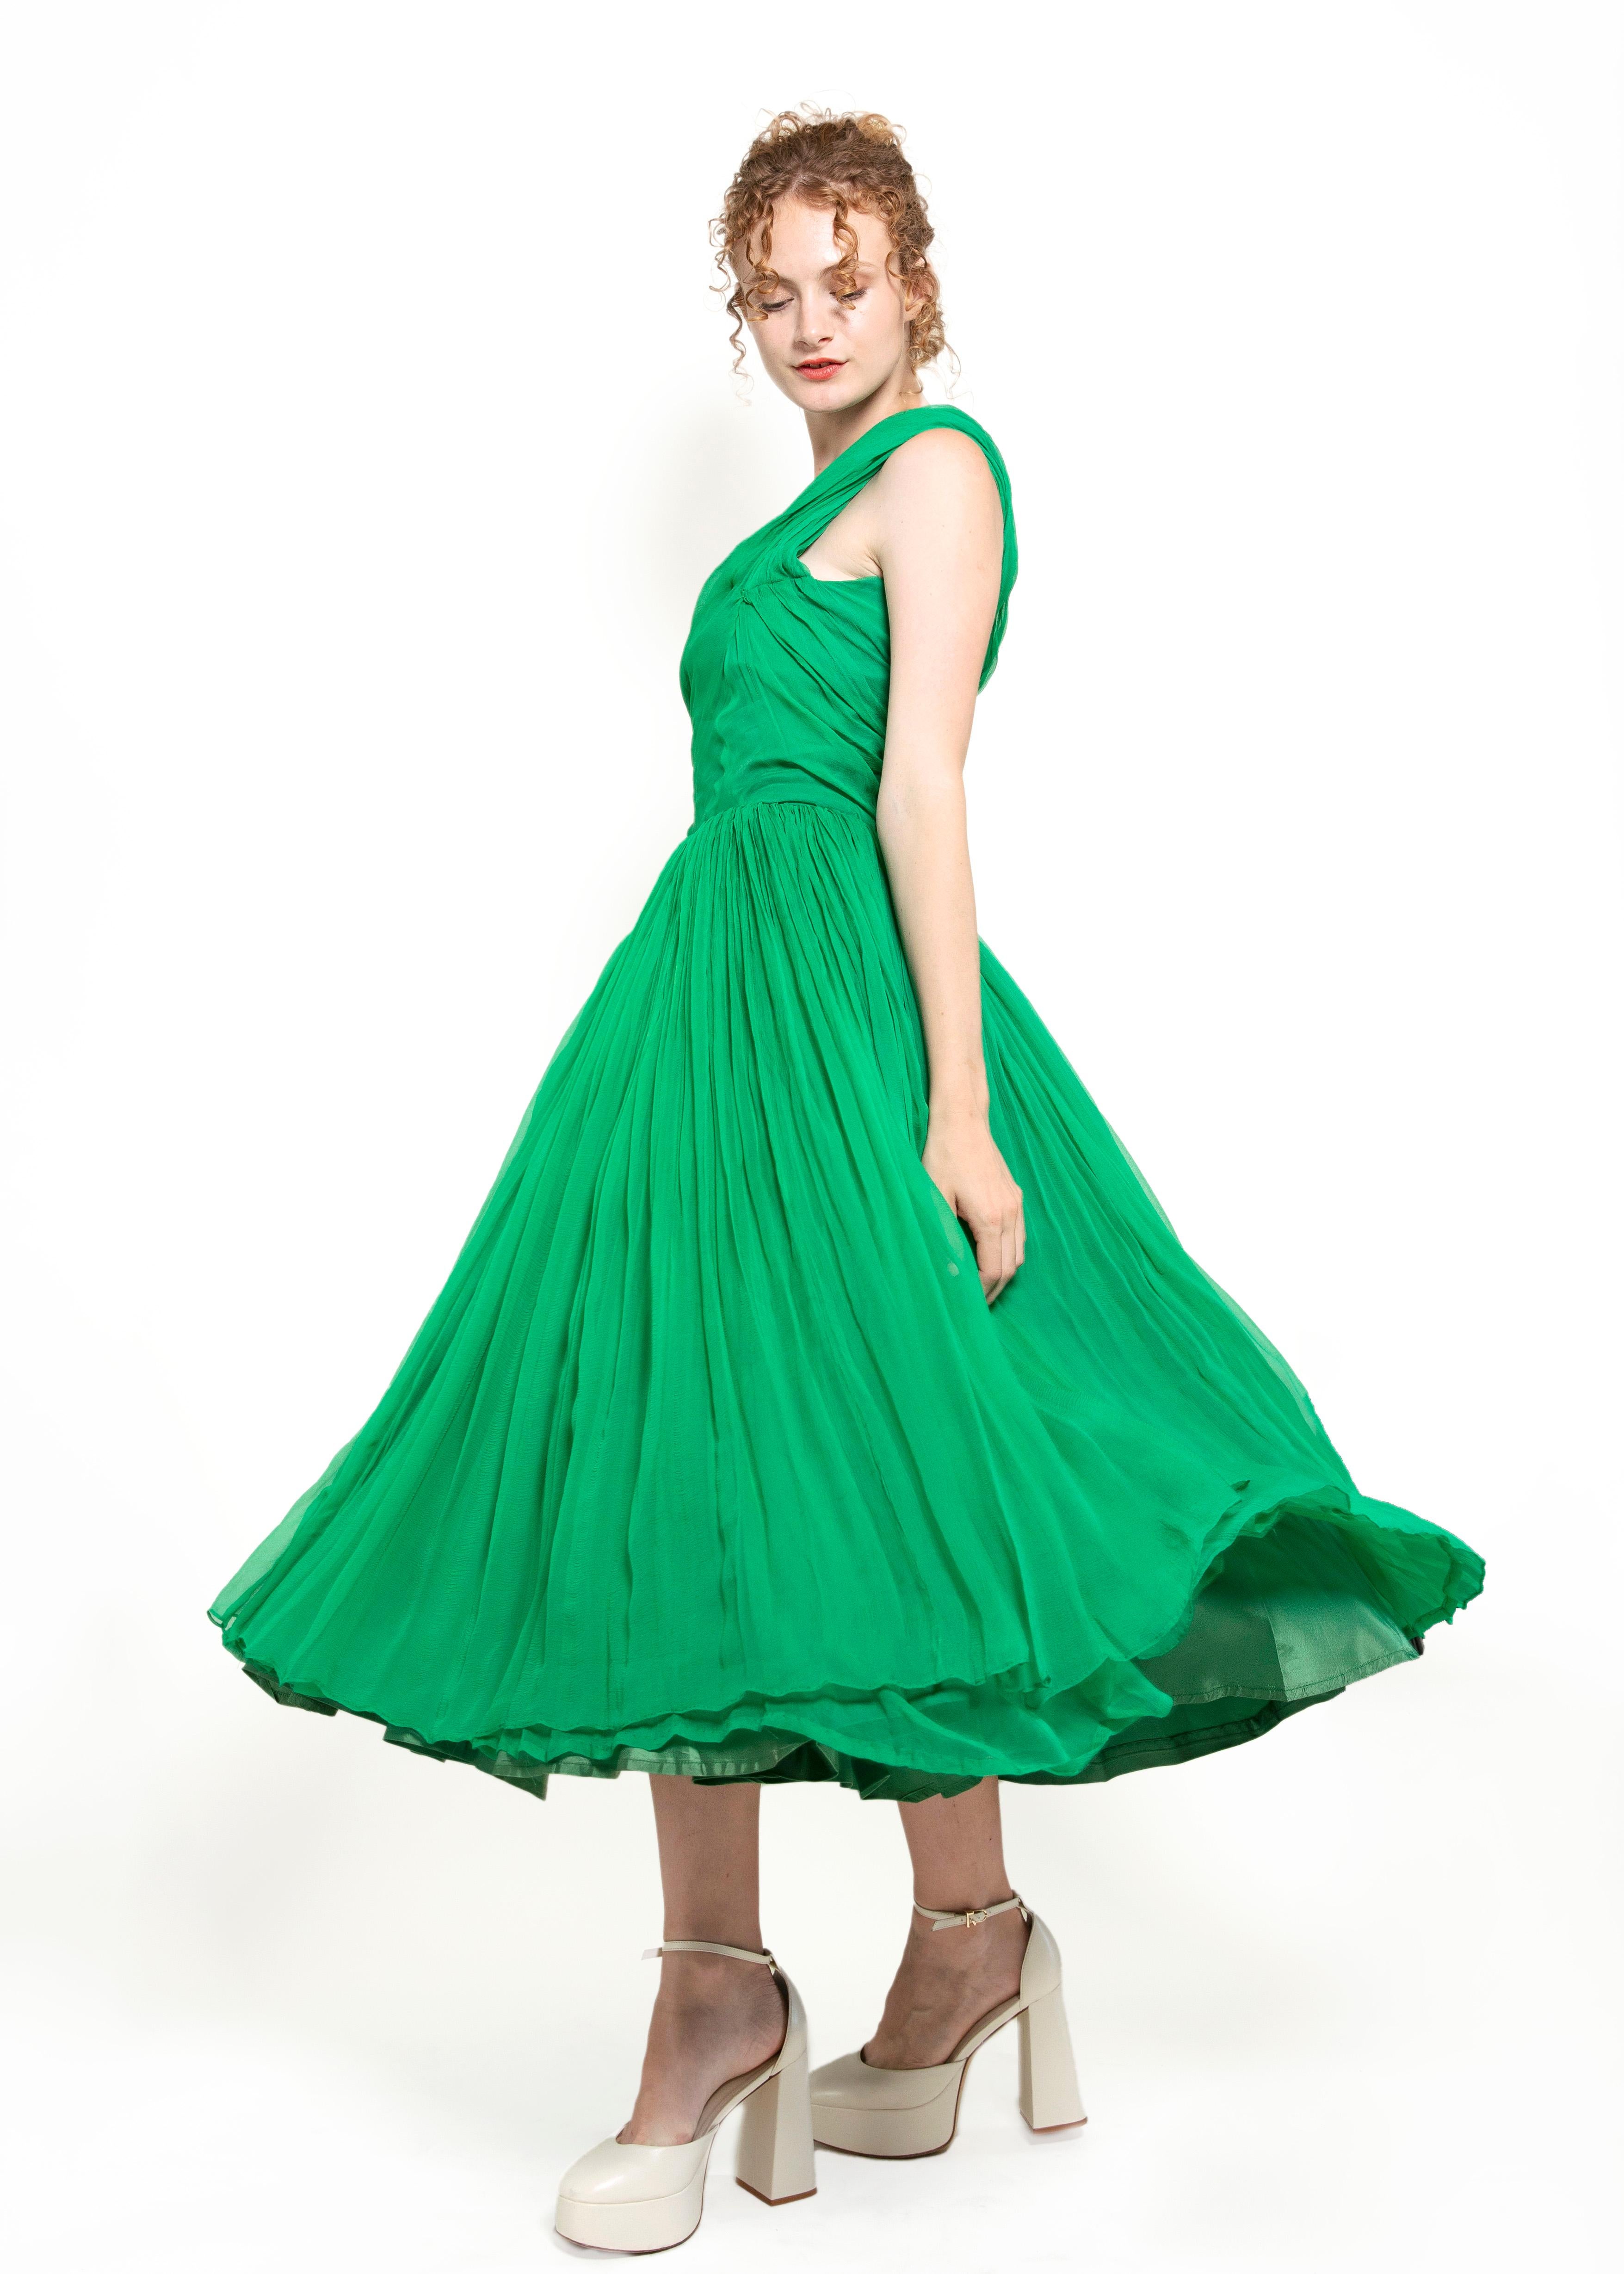 1950's Vintage Kelly Green Silk Chiffon Cocktail Dress For Sale 1